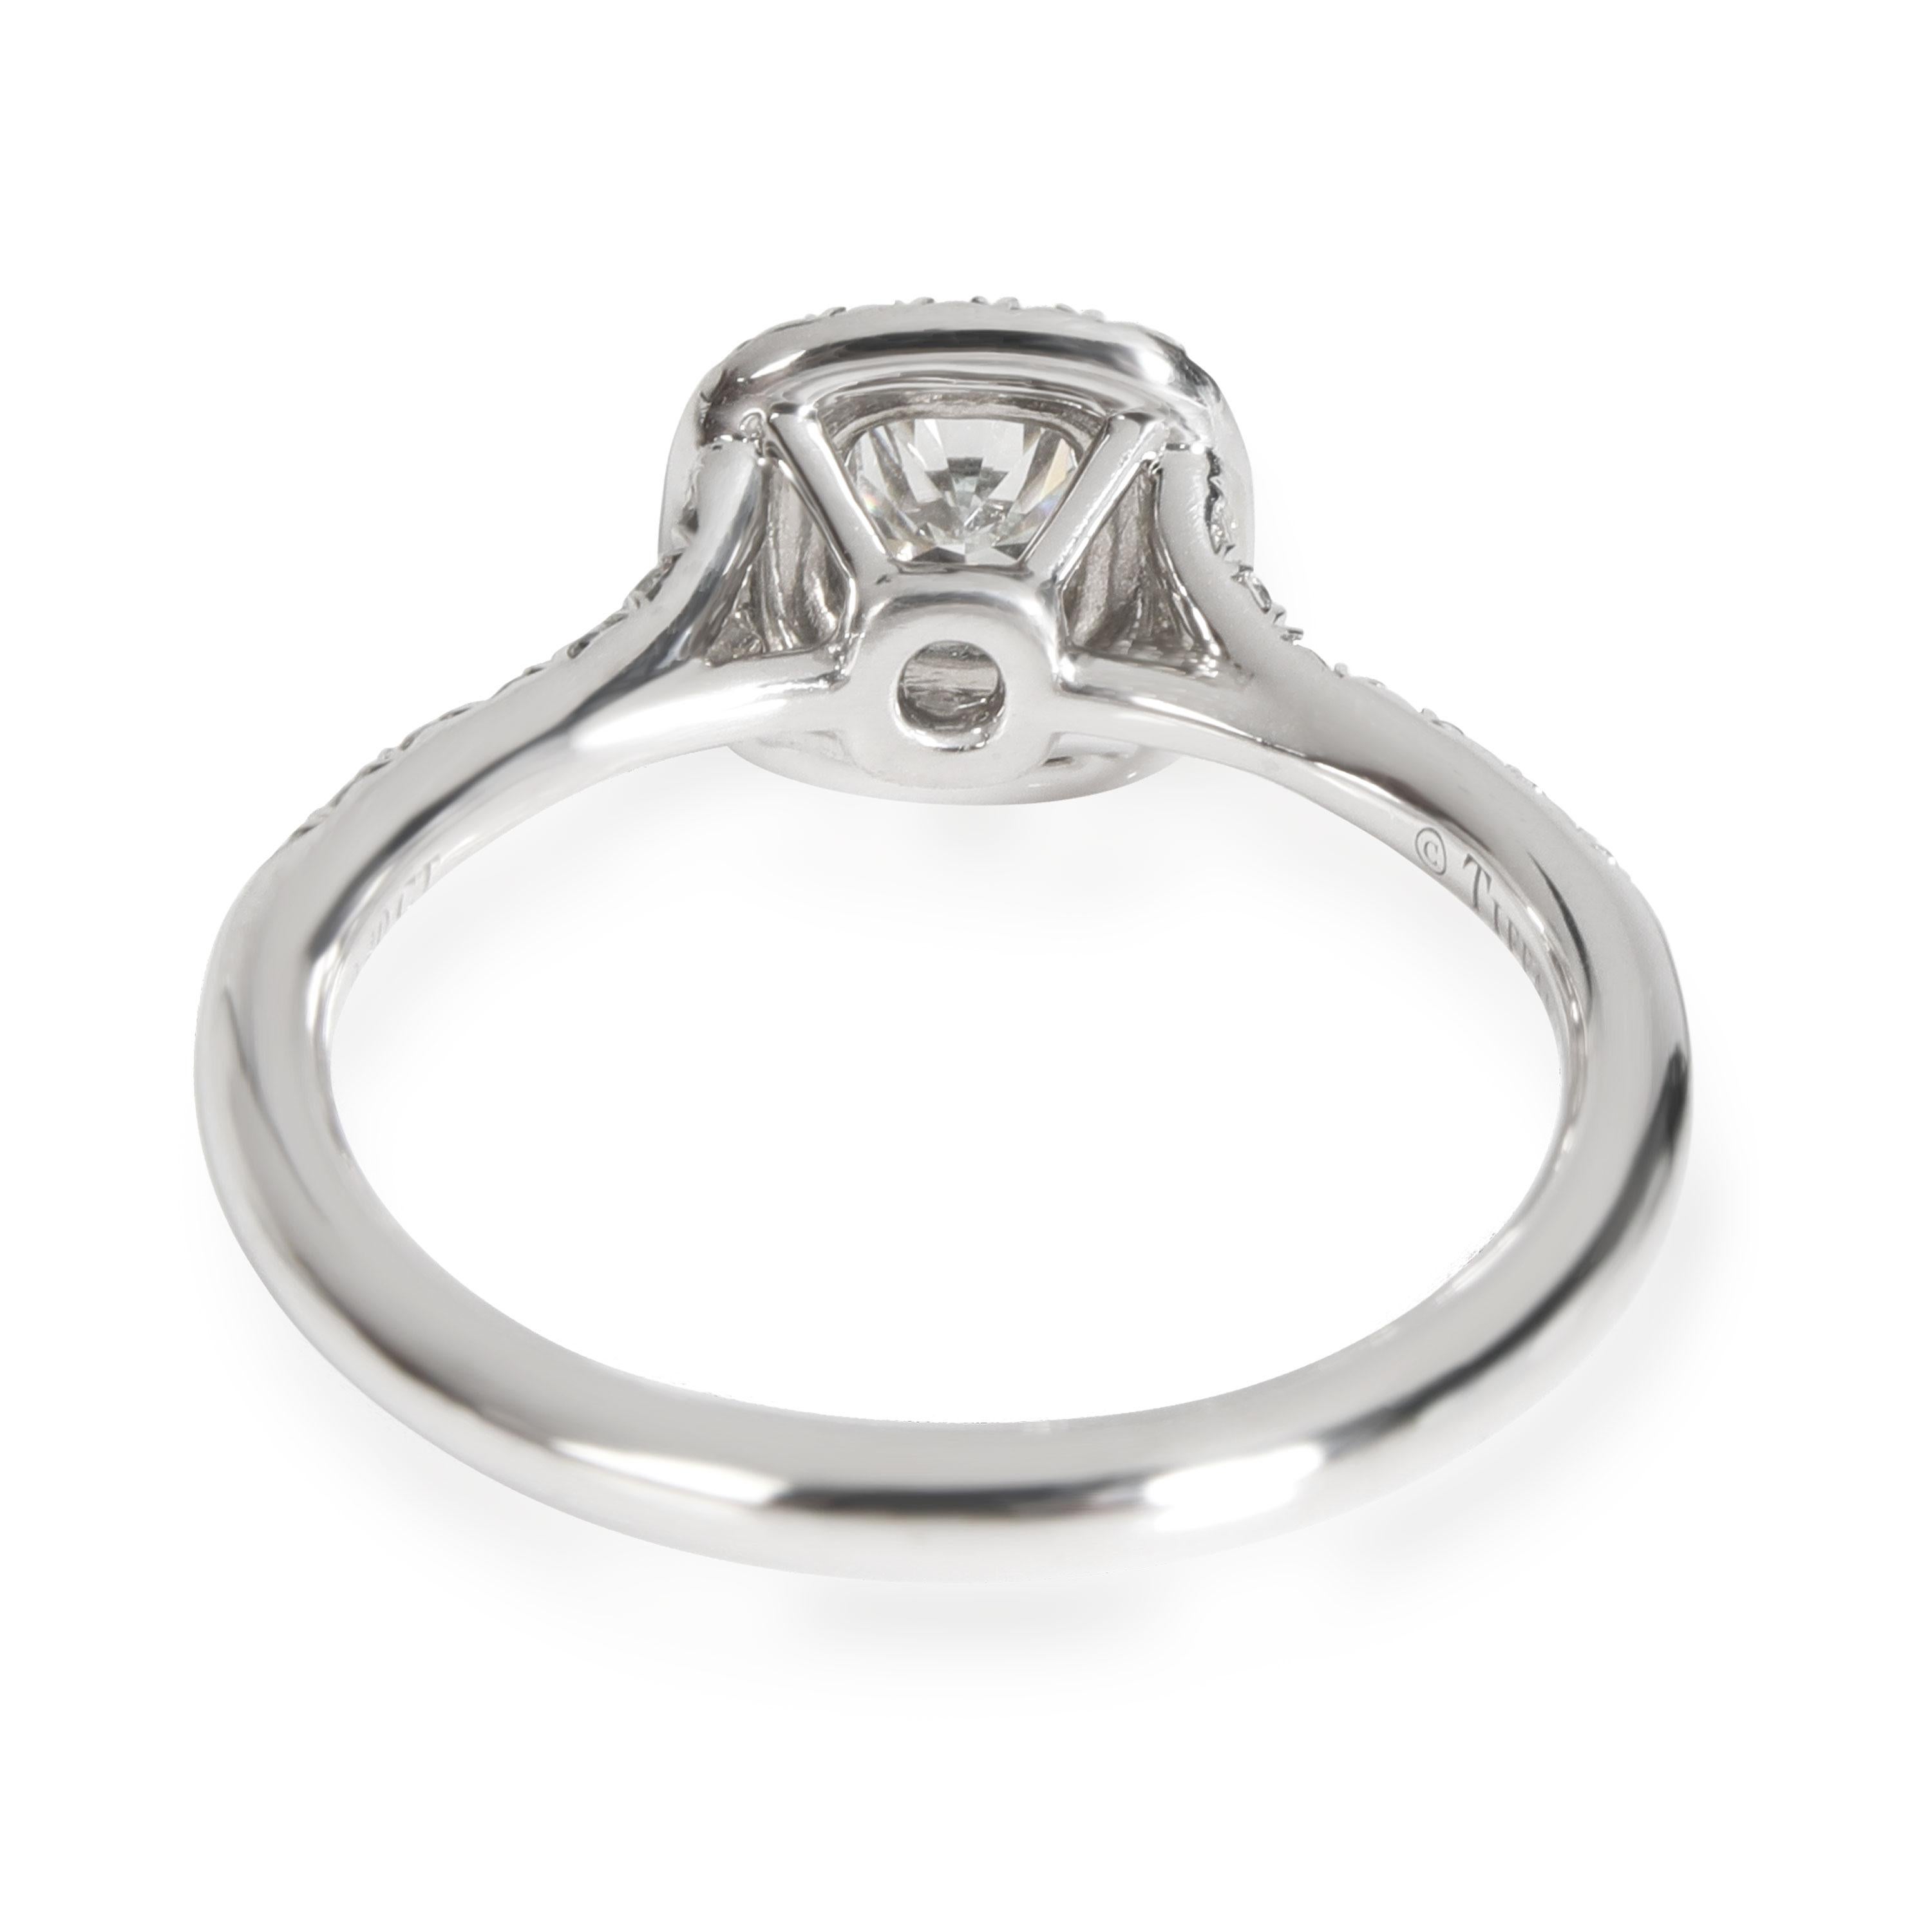 Tiffany & Co. Soleste Diamond Engagement Ring in Platinum G VS2 0.65 Ctw

PRIMARY DETAILS
SKU: 112587
Listing Title: Tiffany & Co. Soleste Diamond Engagement Ring in Platinum G VS2 0.65 Ctw
Condition Description: Retails for 6,850 USD. In excellent